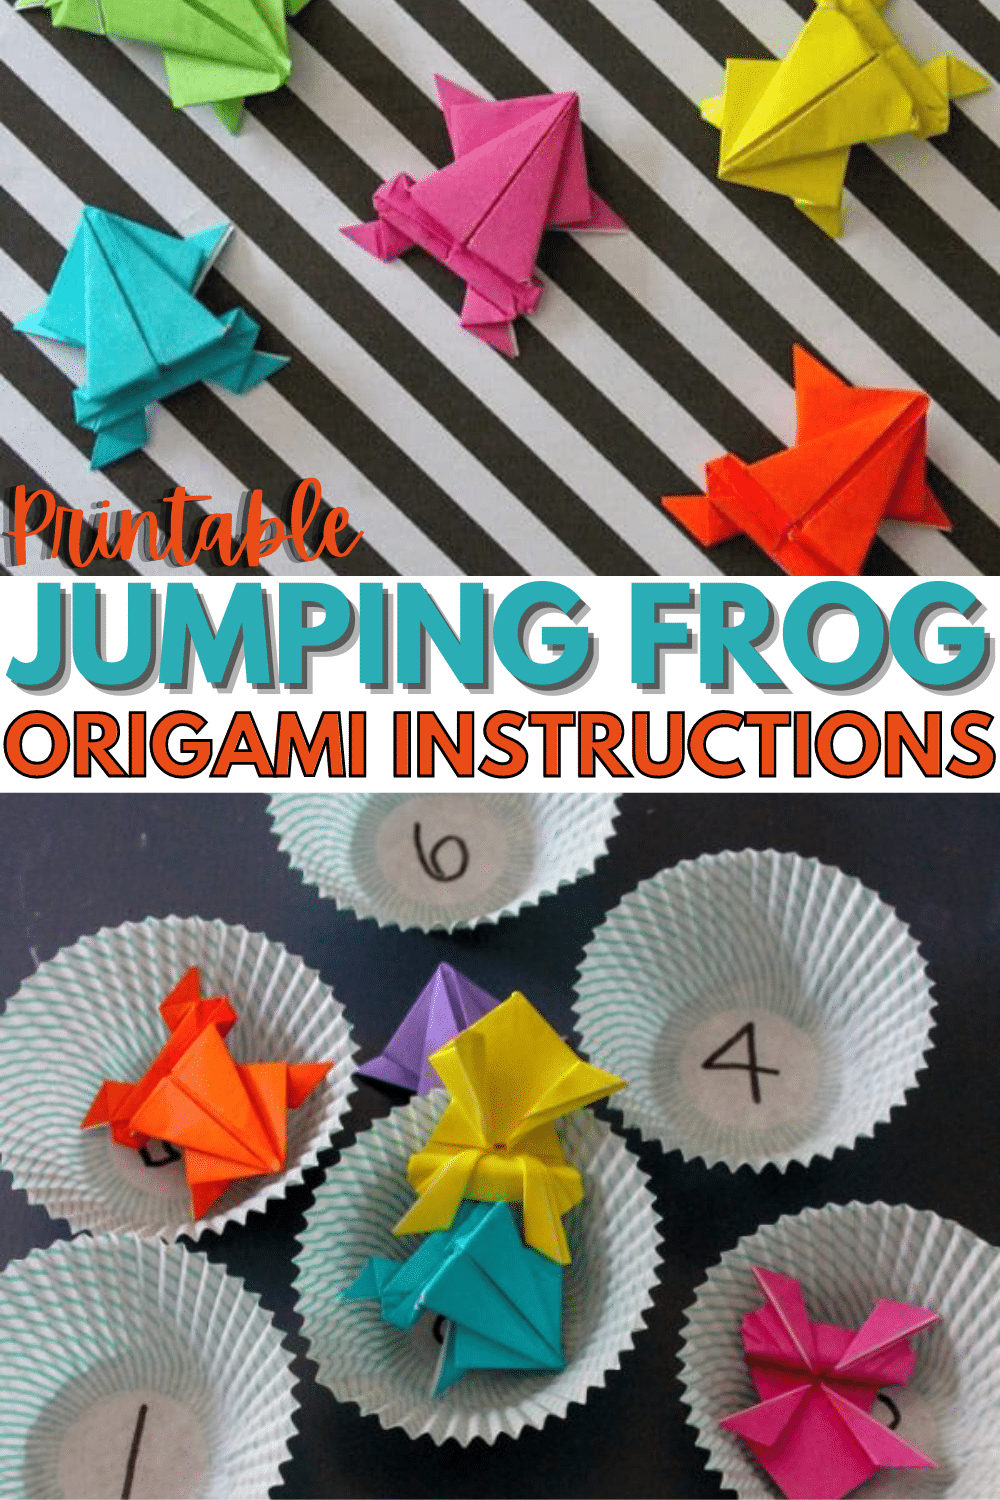 These jumping origami frog instructions are easy to follow and your whole family can have fun playing games with these little paper frogs. #origami #printables #paperfolding via @wondermomwannab